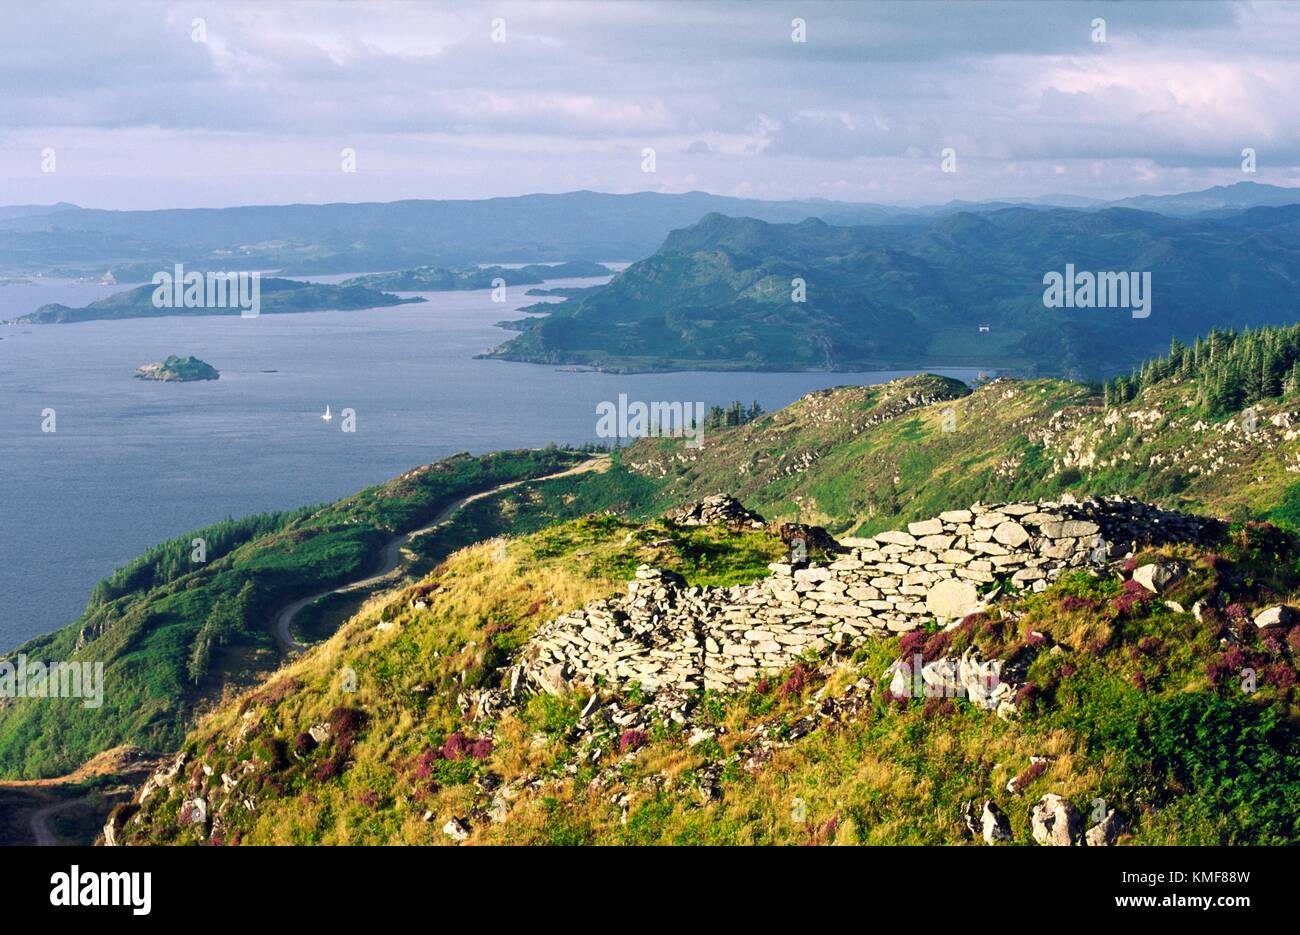 Castle Dounie dun dates from late Iron Age. Strategic fort on Sound of Jura above Crinan and Dunadd, Kilmartin Valley. Argyll, Scotland. Looking N.E. Stock Photo